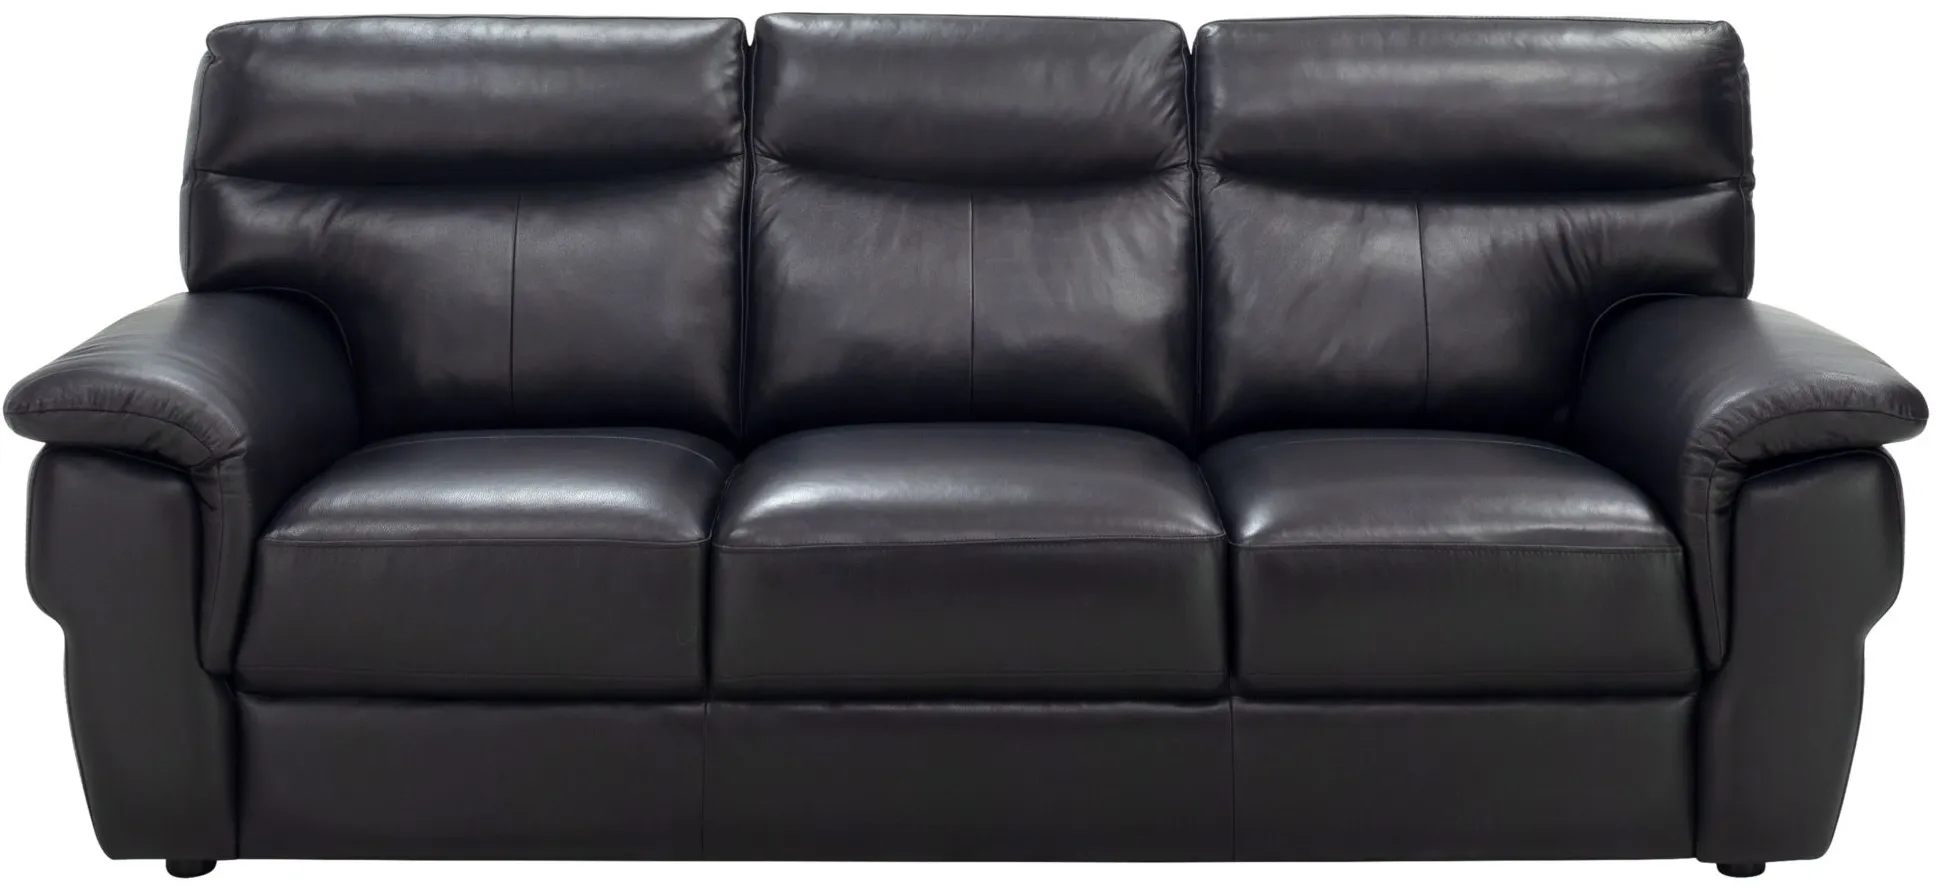 Luca 2-pc. Sofa and Loveseat Set in Black by Chateau D'Ax